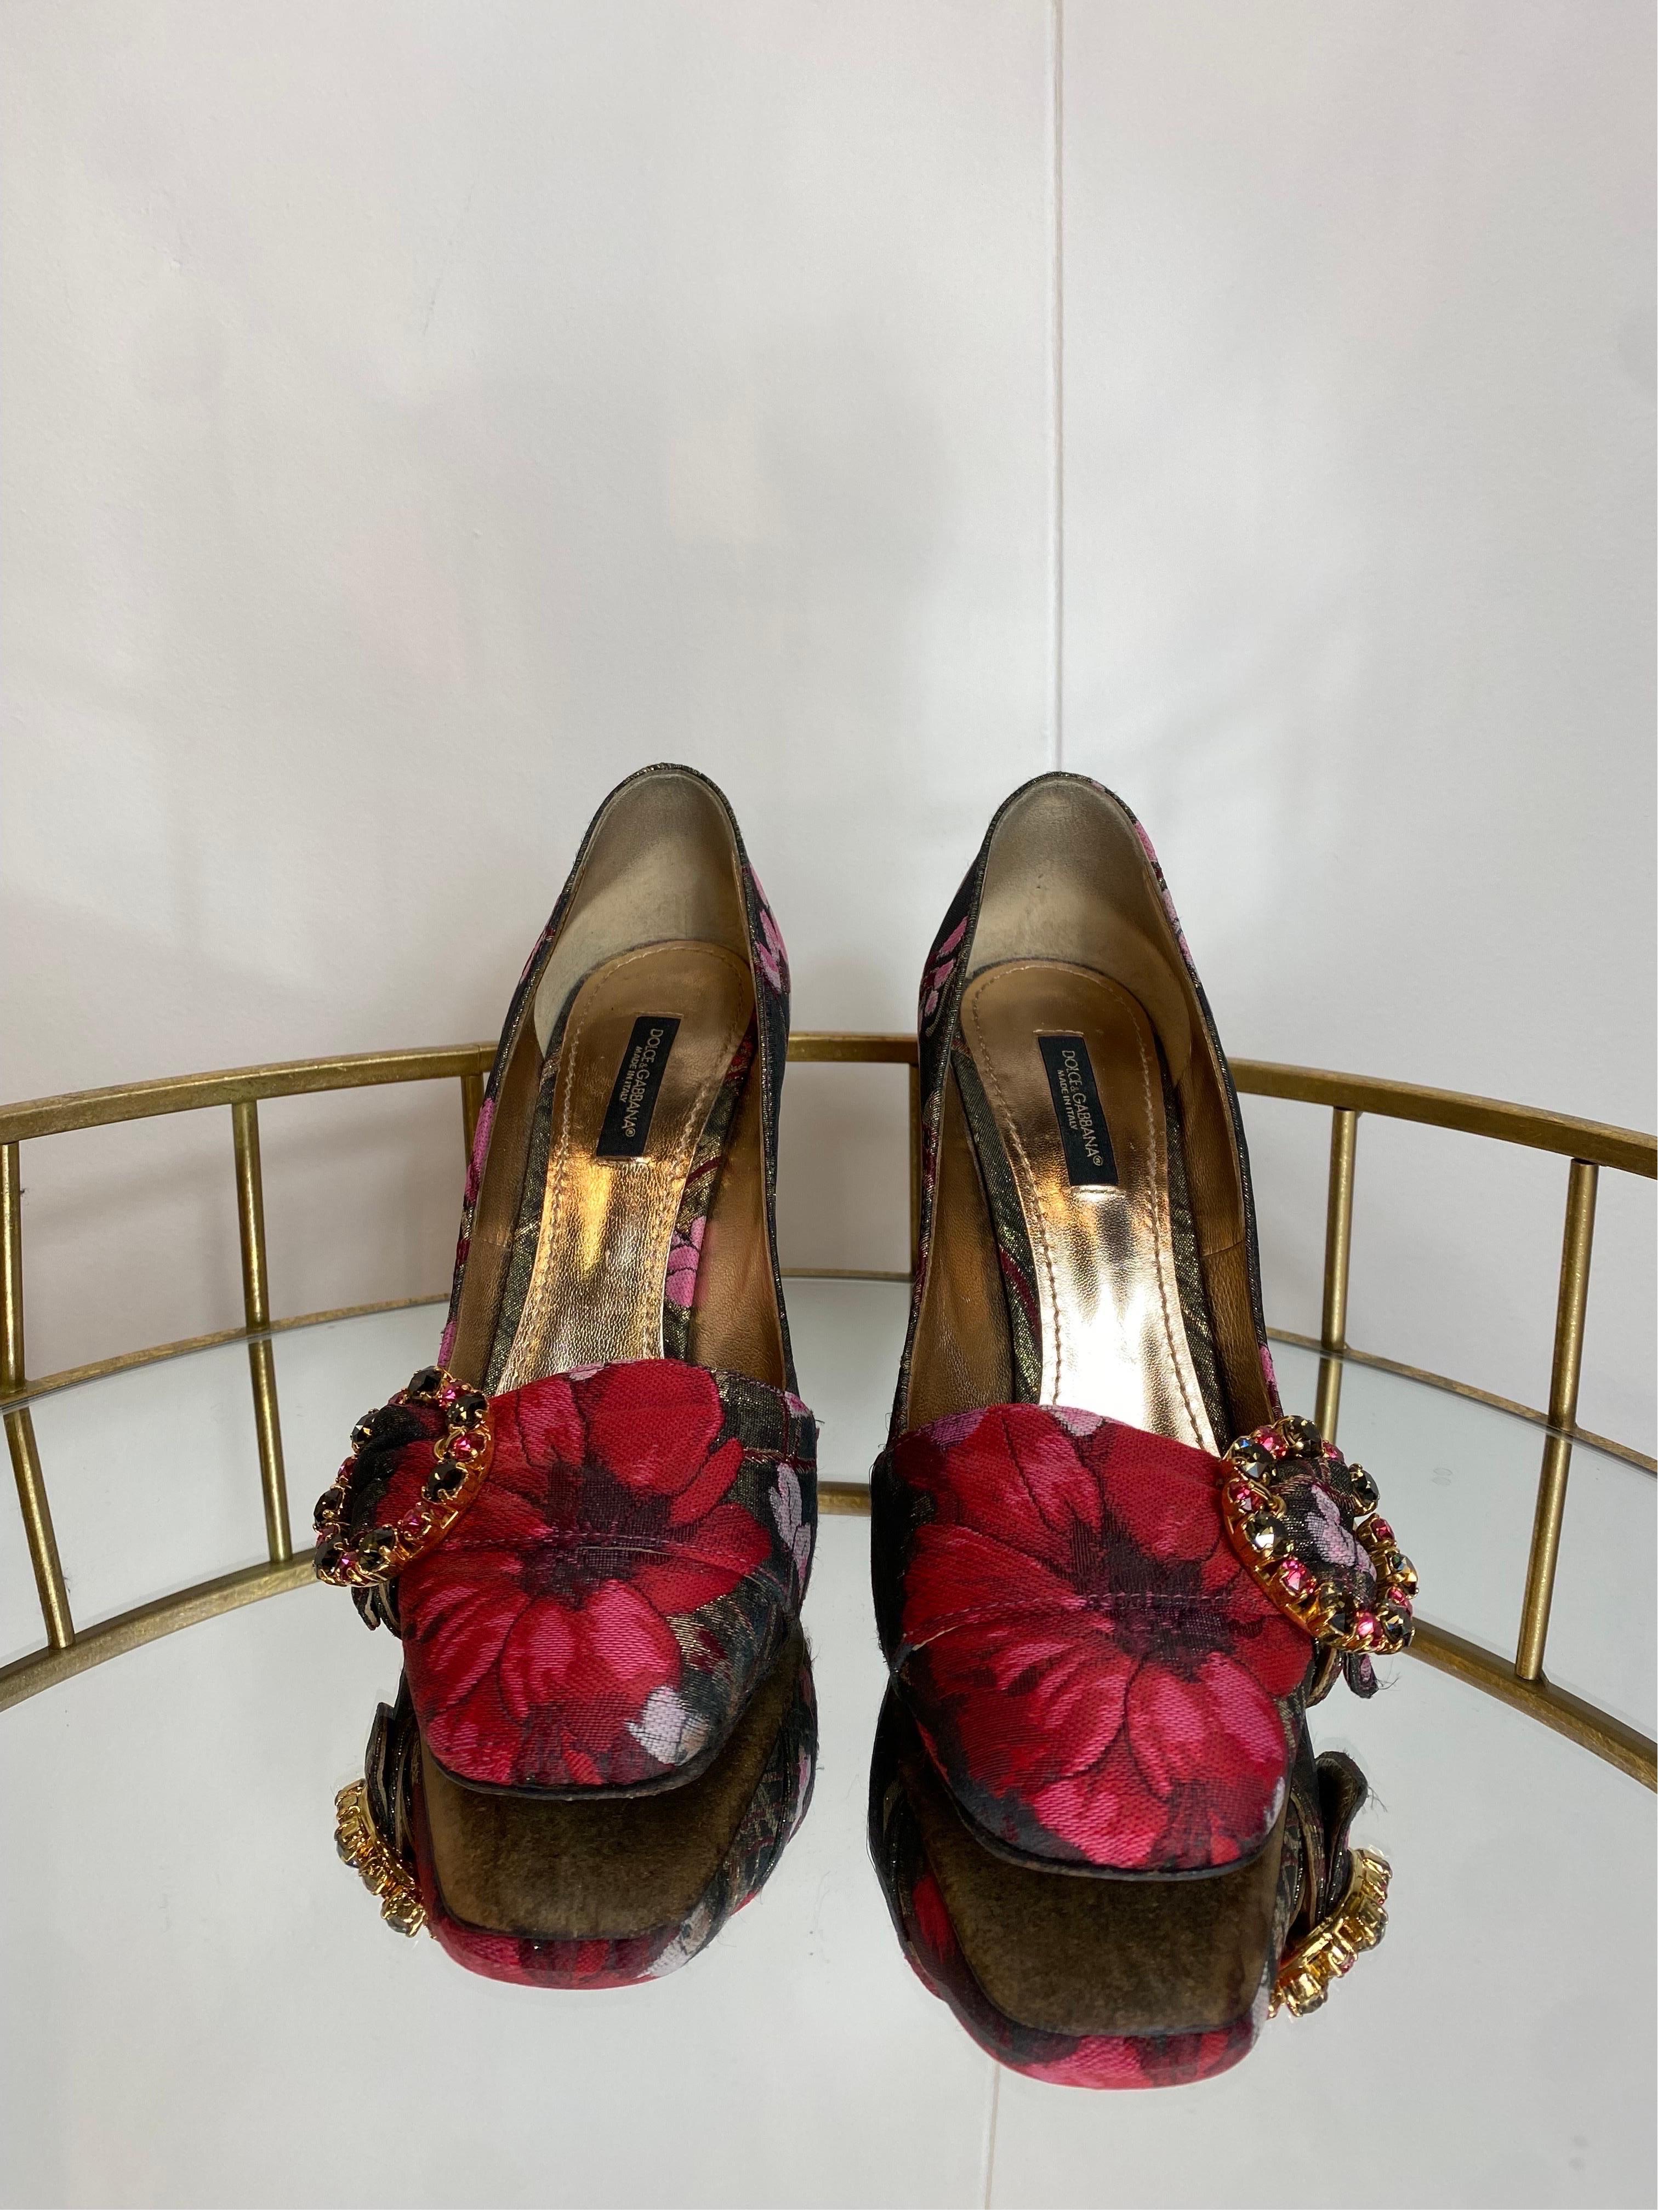 Dolce and Gabbana flower Jacquard Jewelry Pumps In Excellent Condition For Sale In Carnate, IT